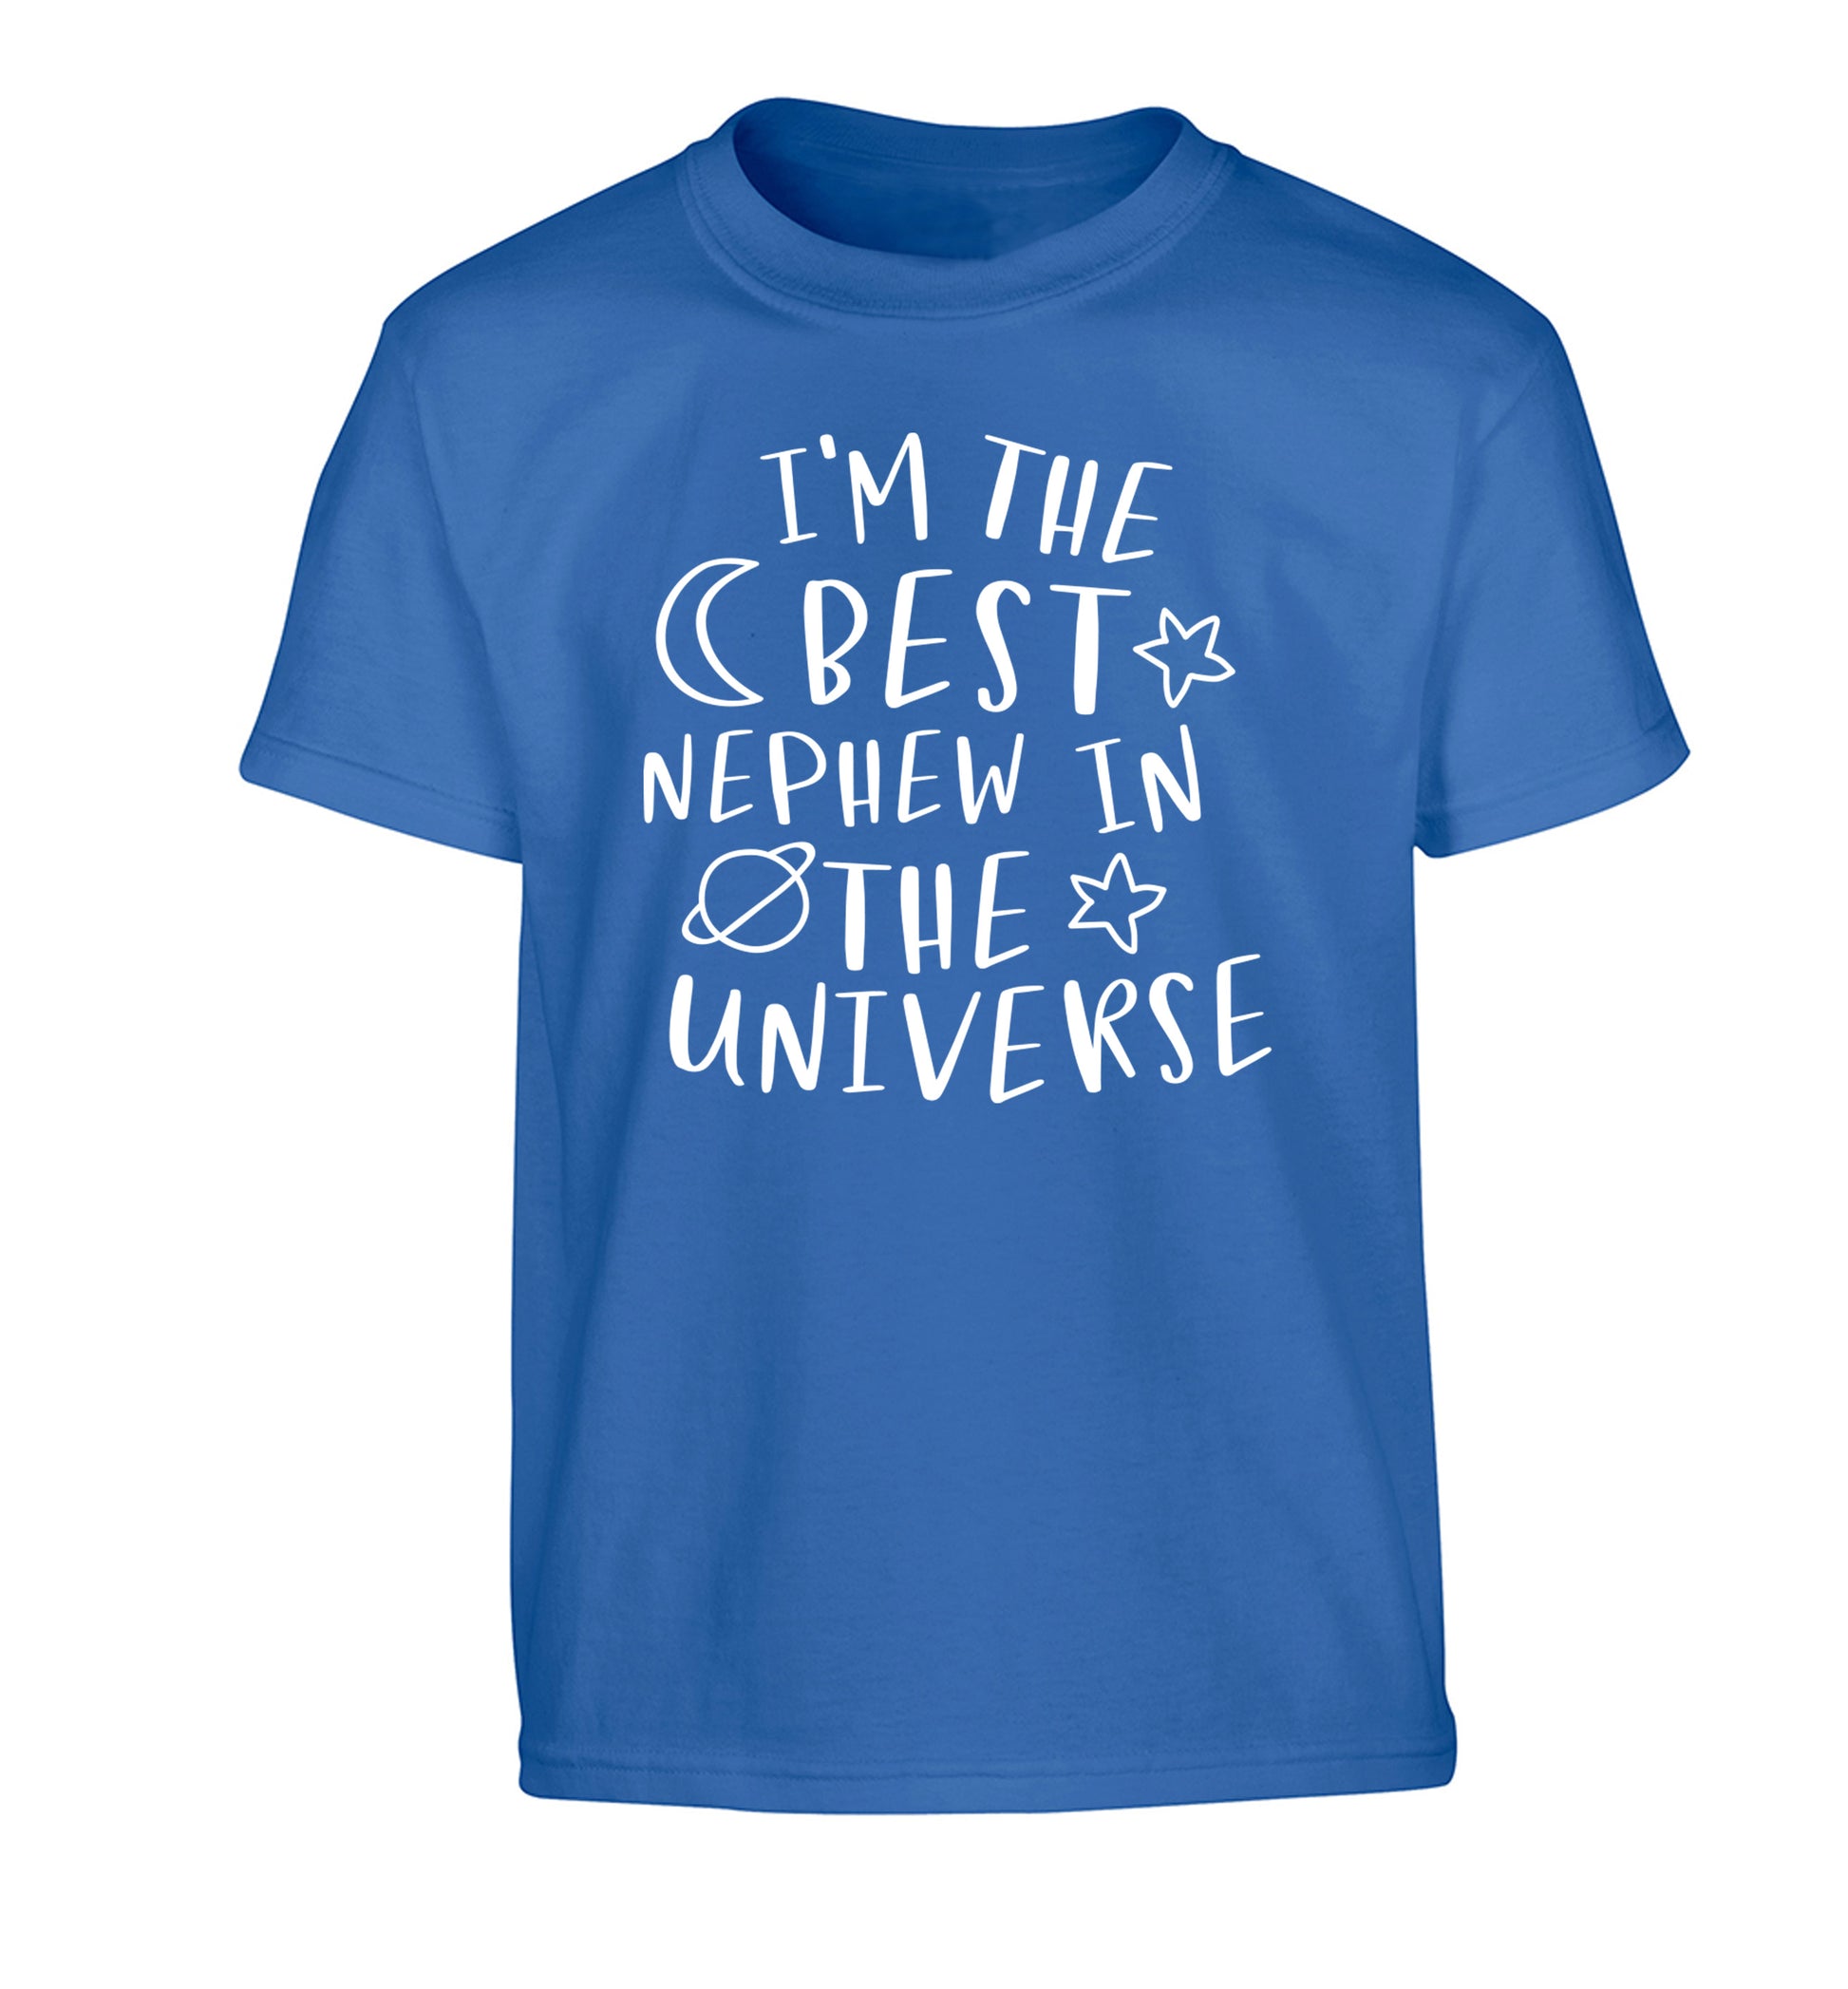 I'm the best nephew in the universe Children's blue Tshirt 12-13 Years